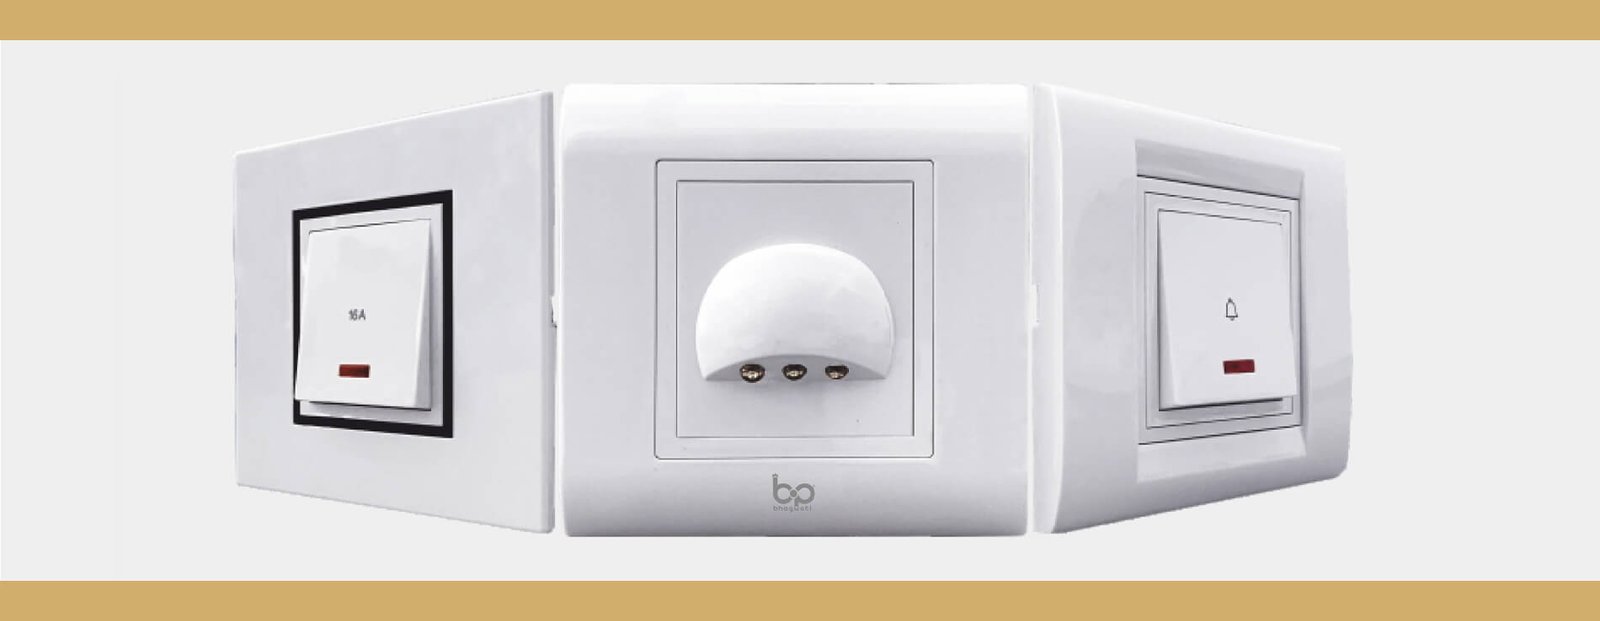 Electric Light Switches Supplier